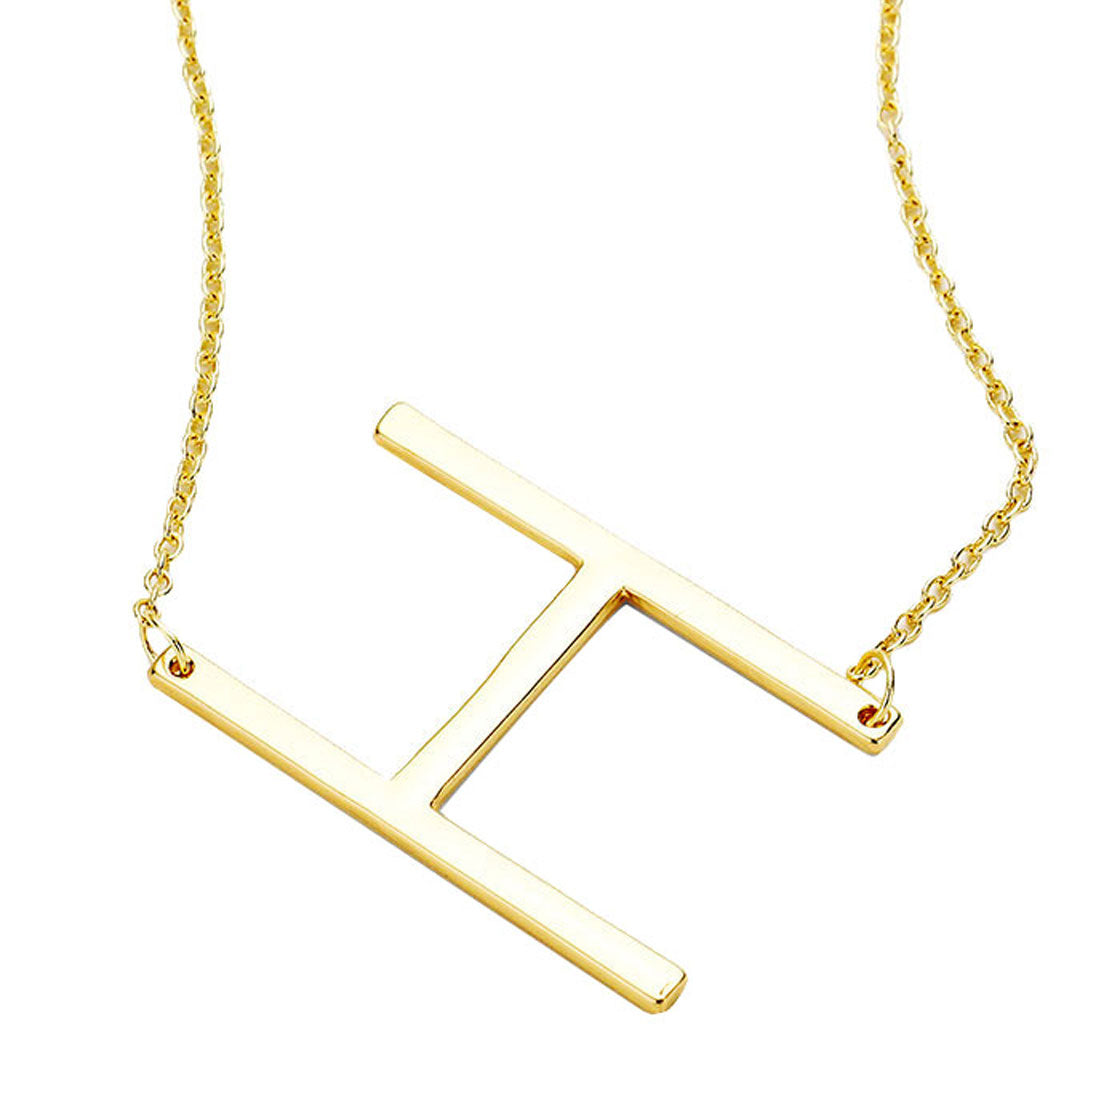 Gold H Monogram Metal Pendant Necklace. Beautifully crafted design adds a gorgeous glow to any outfit. Jewelry that fits your lifestyle! Perfect Birthday Gift, Anniversary Gift, Mother's Day Gift, Anniversary Gift, Graduation Gift, Prom Jewelry, Just Because Gift, Thank you Gift.